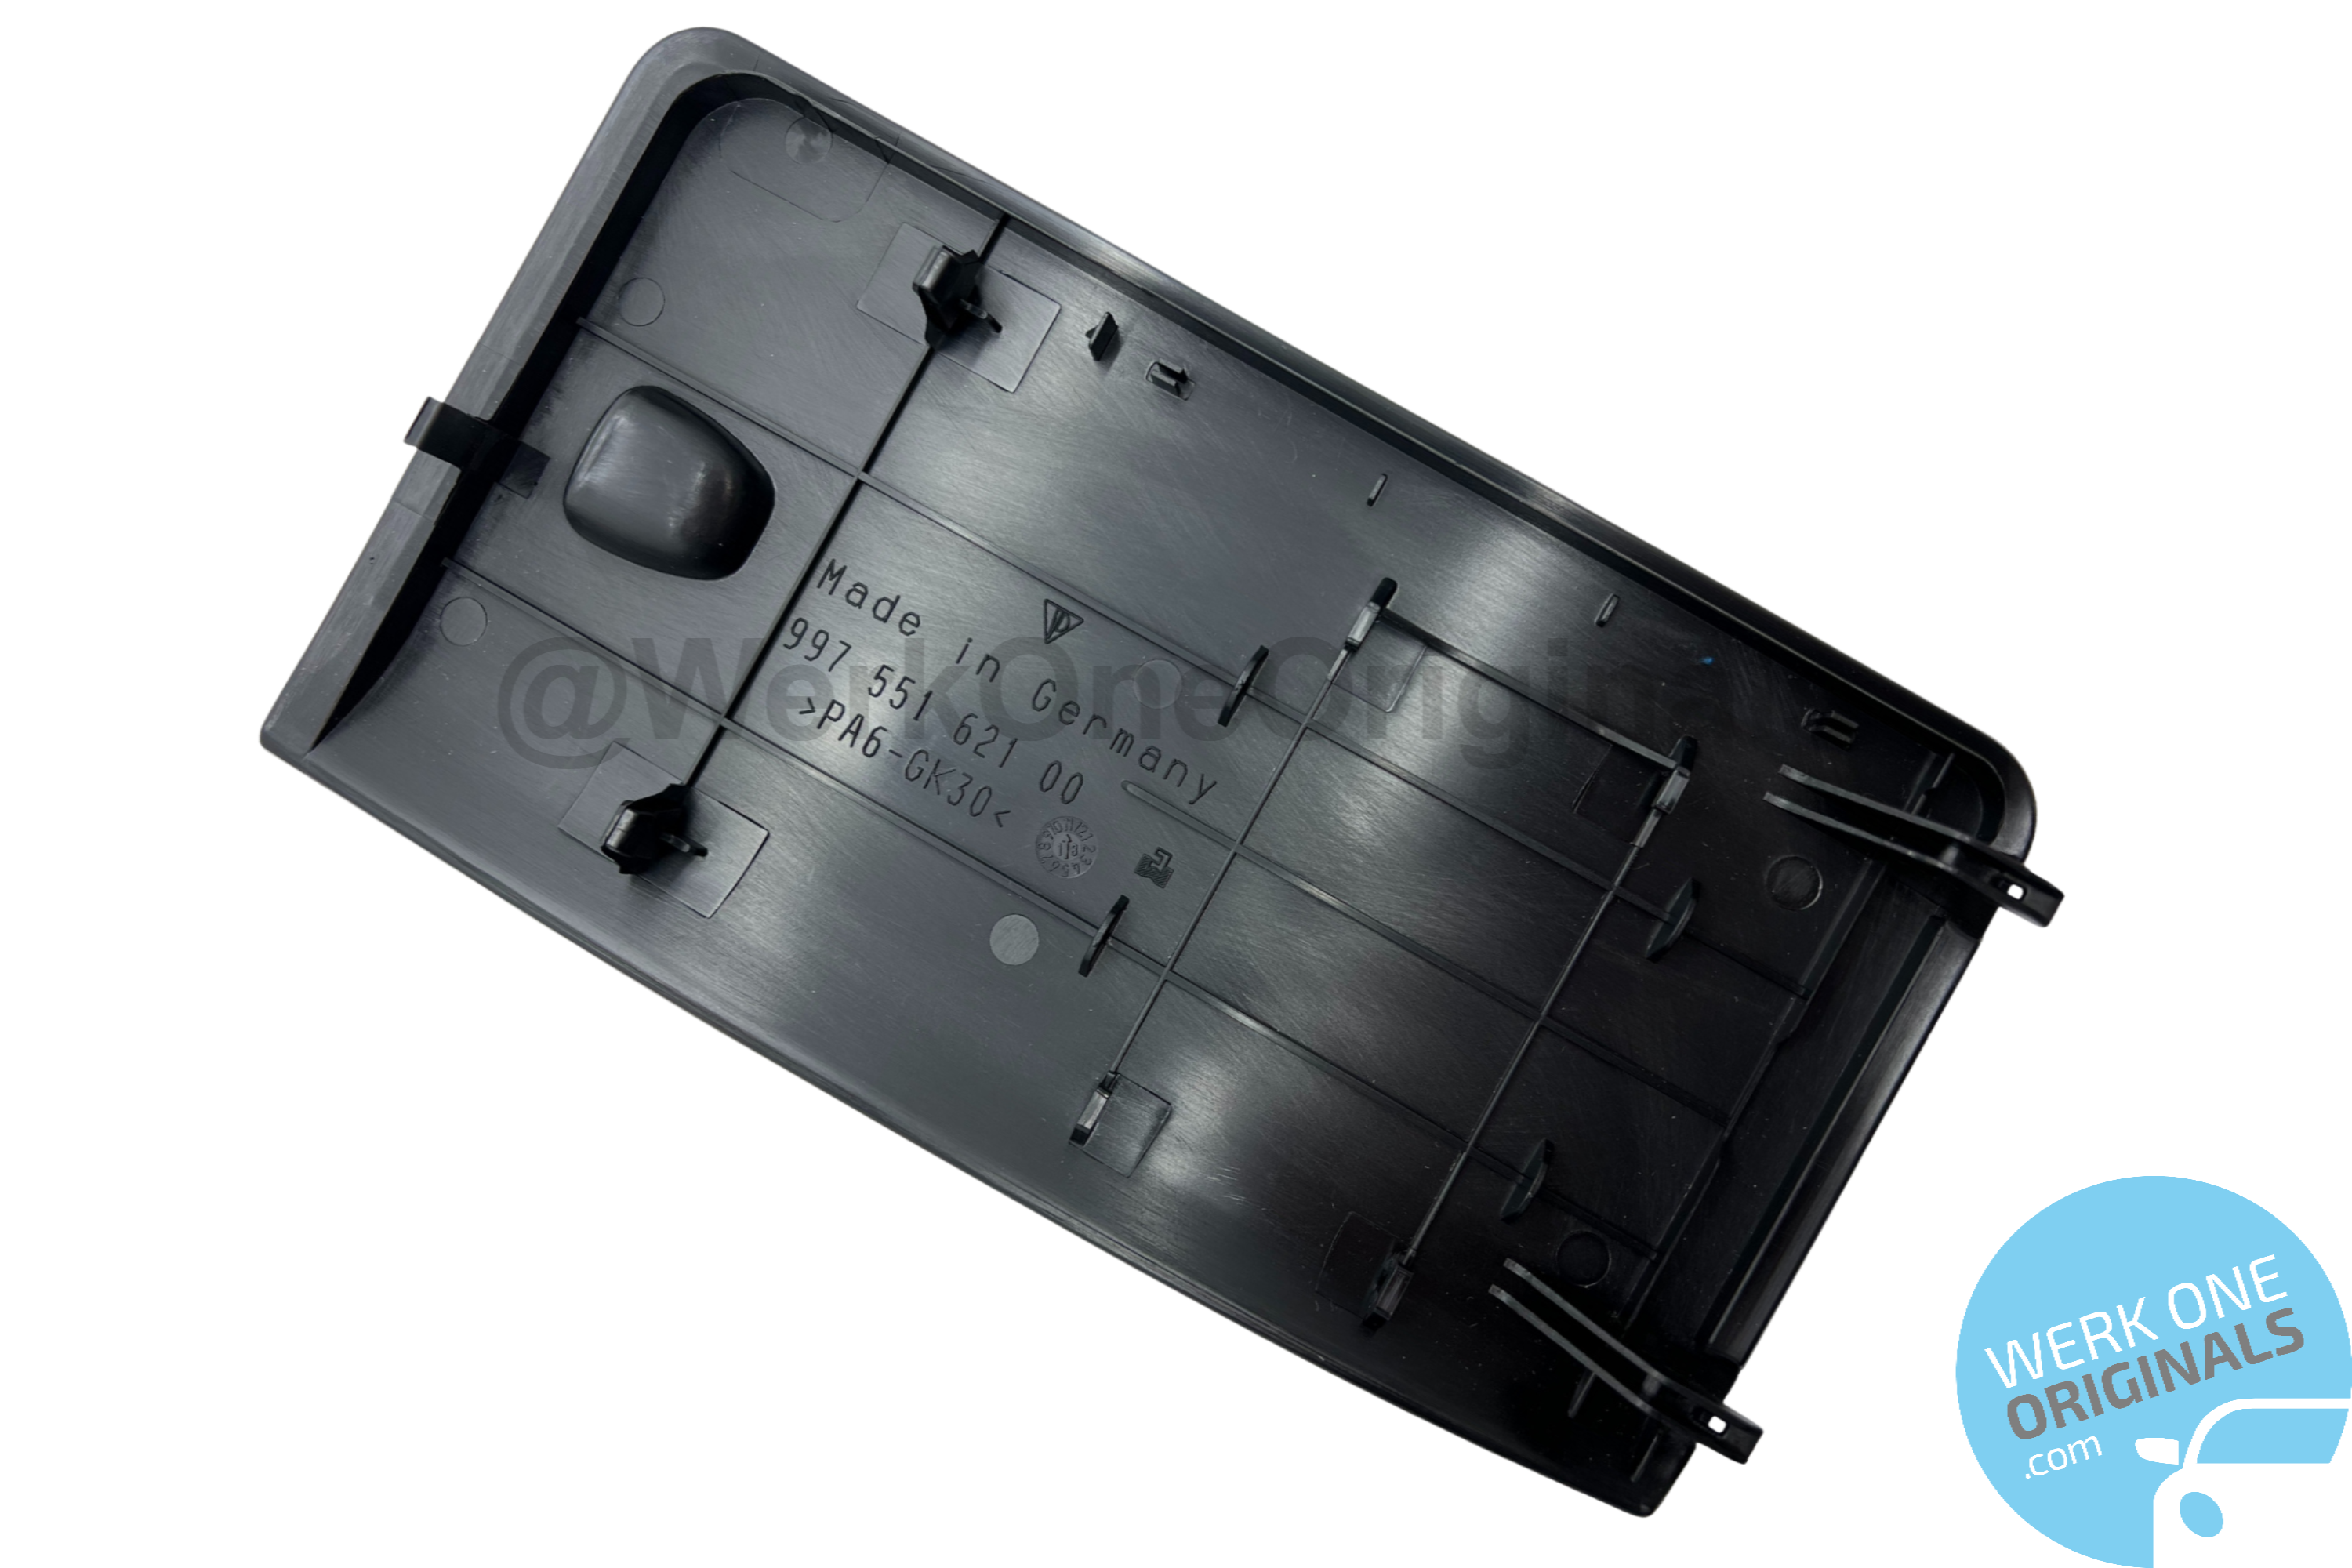 Porsche Fuse Box Lid Cover for Boxster Type 987 LHD Models!